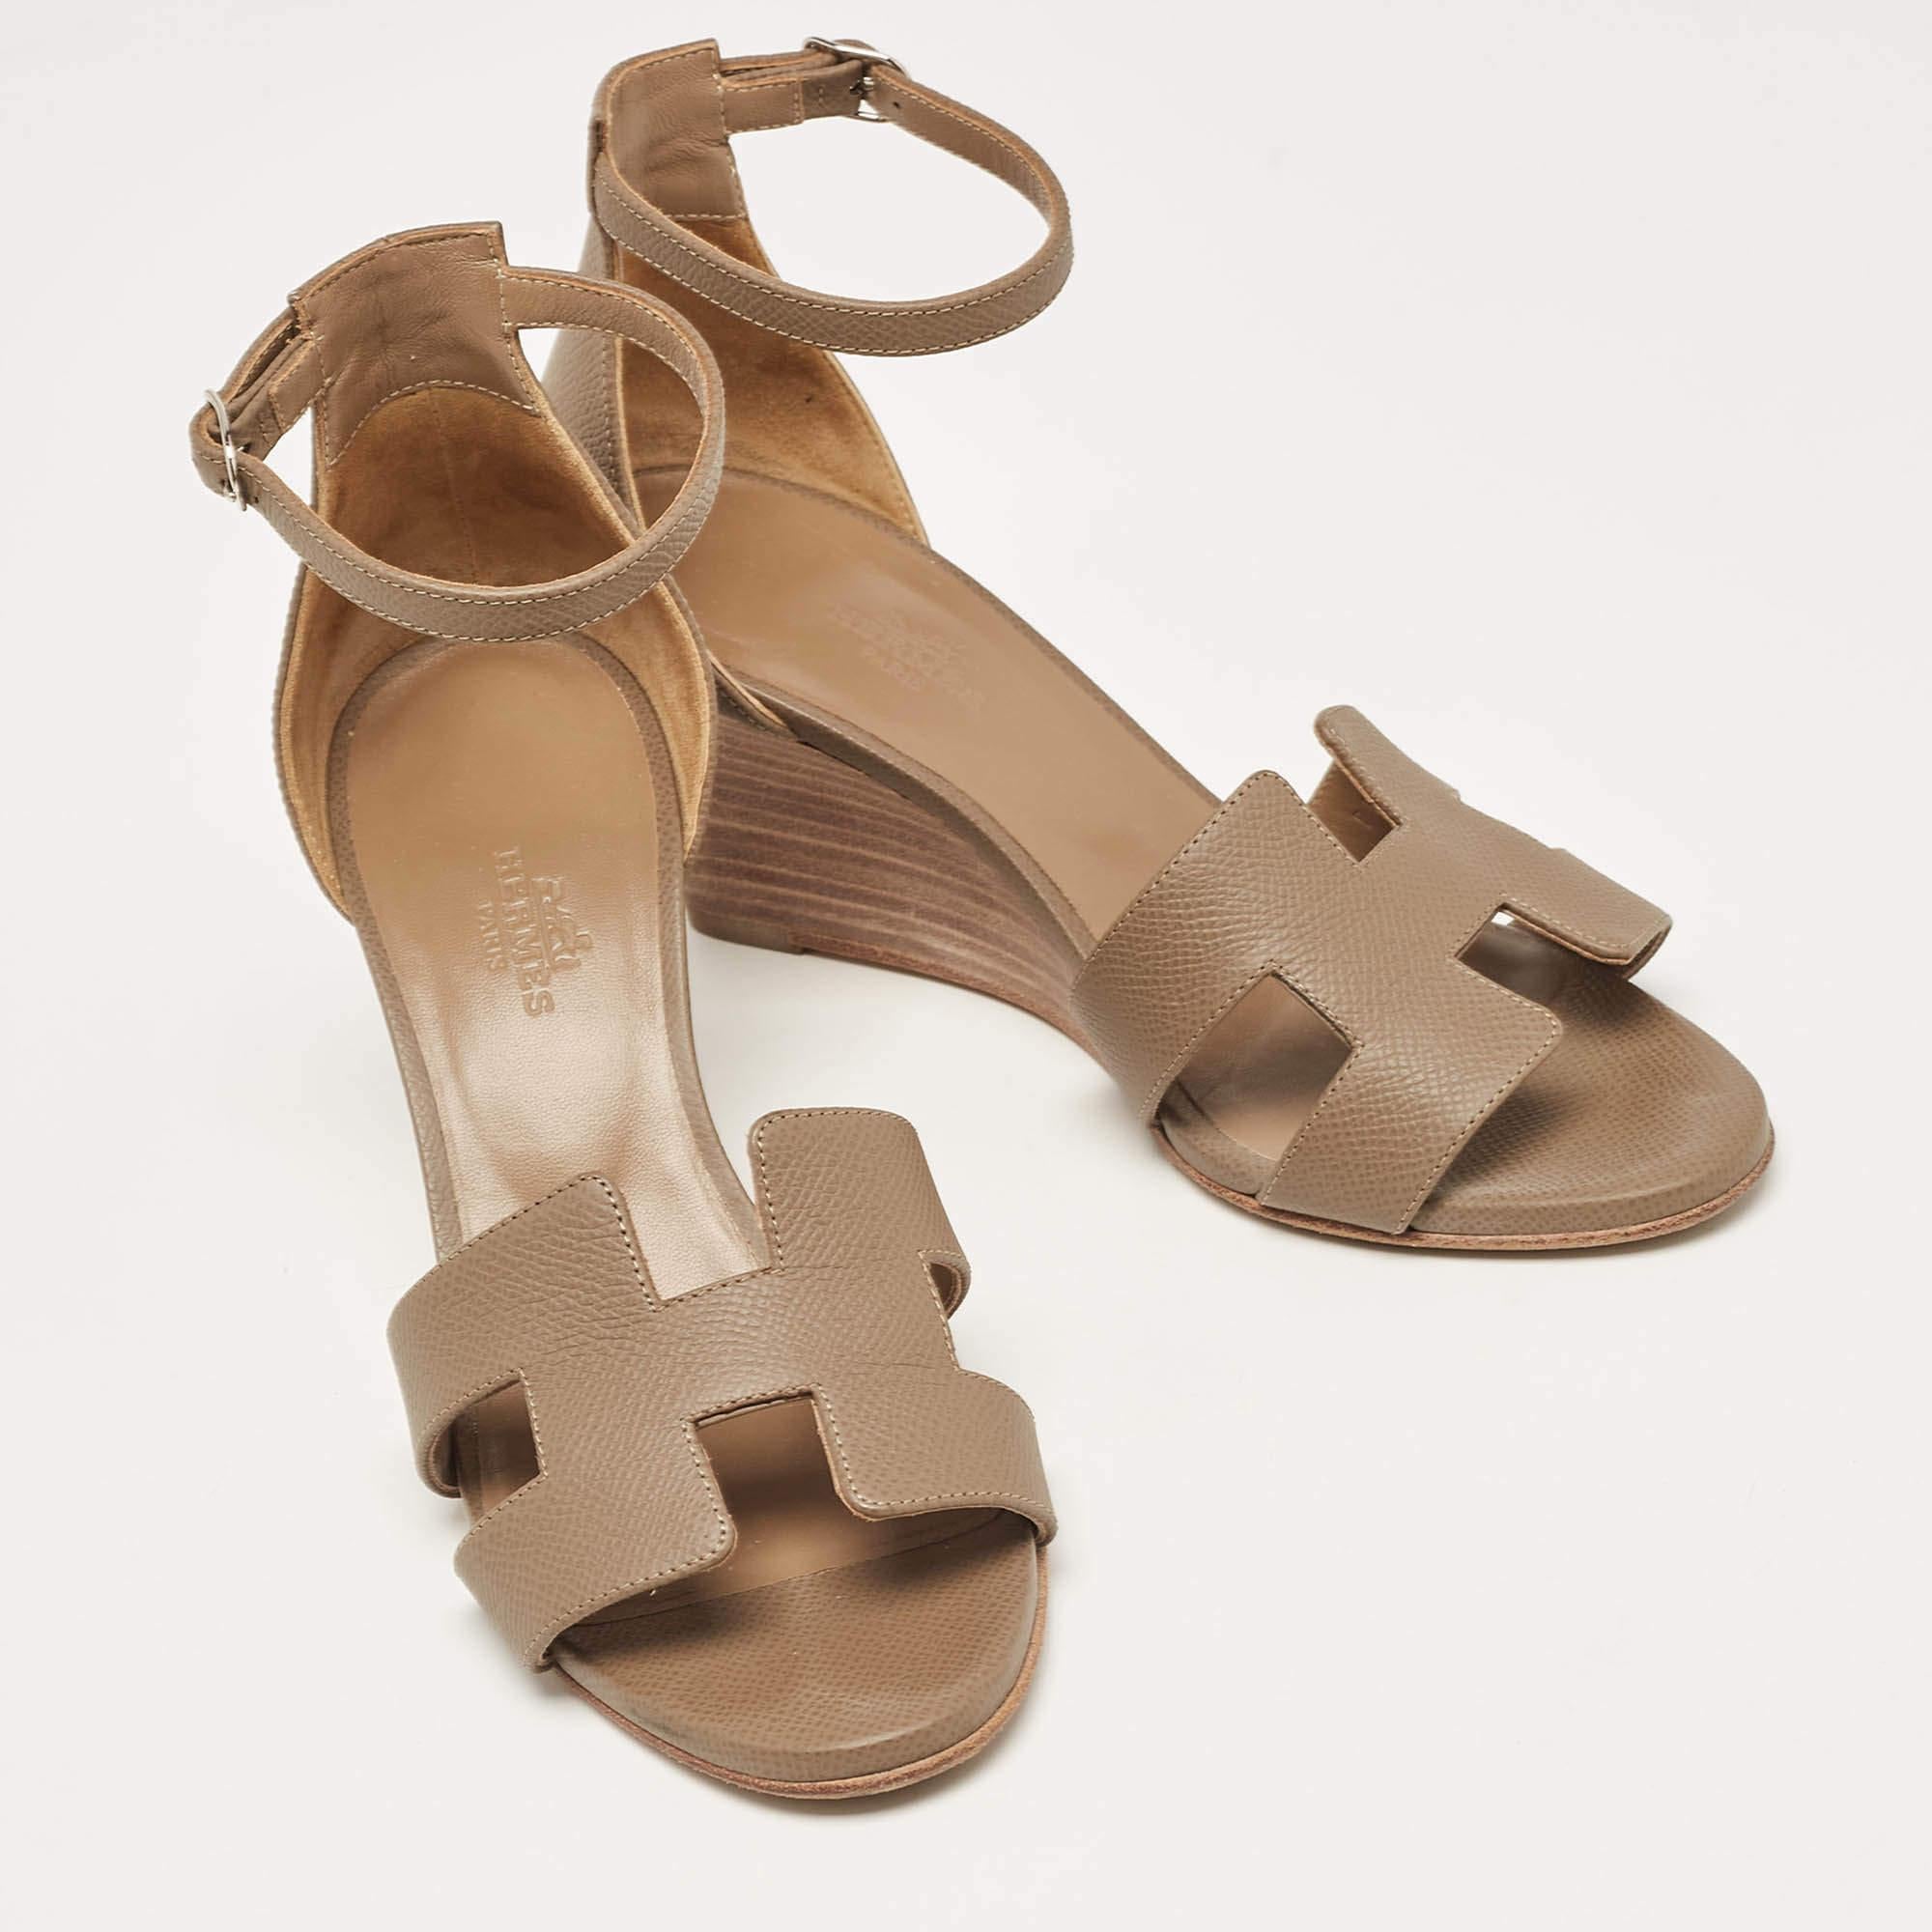 Hermes Brown Leather Legend Wedge Sandals Size 37 2